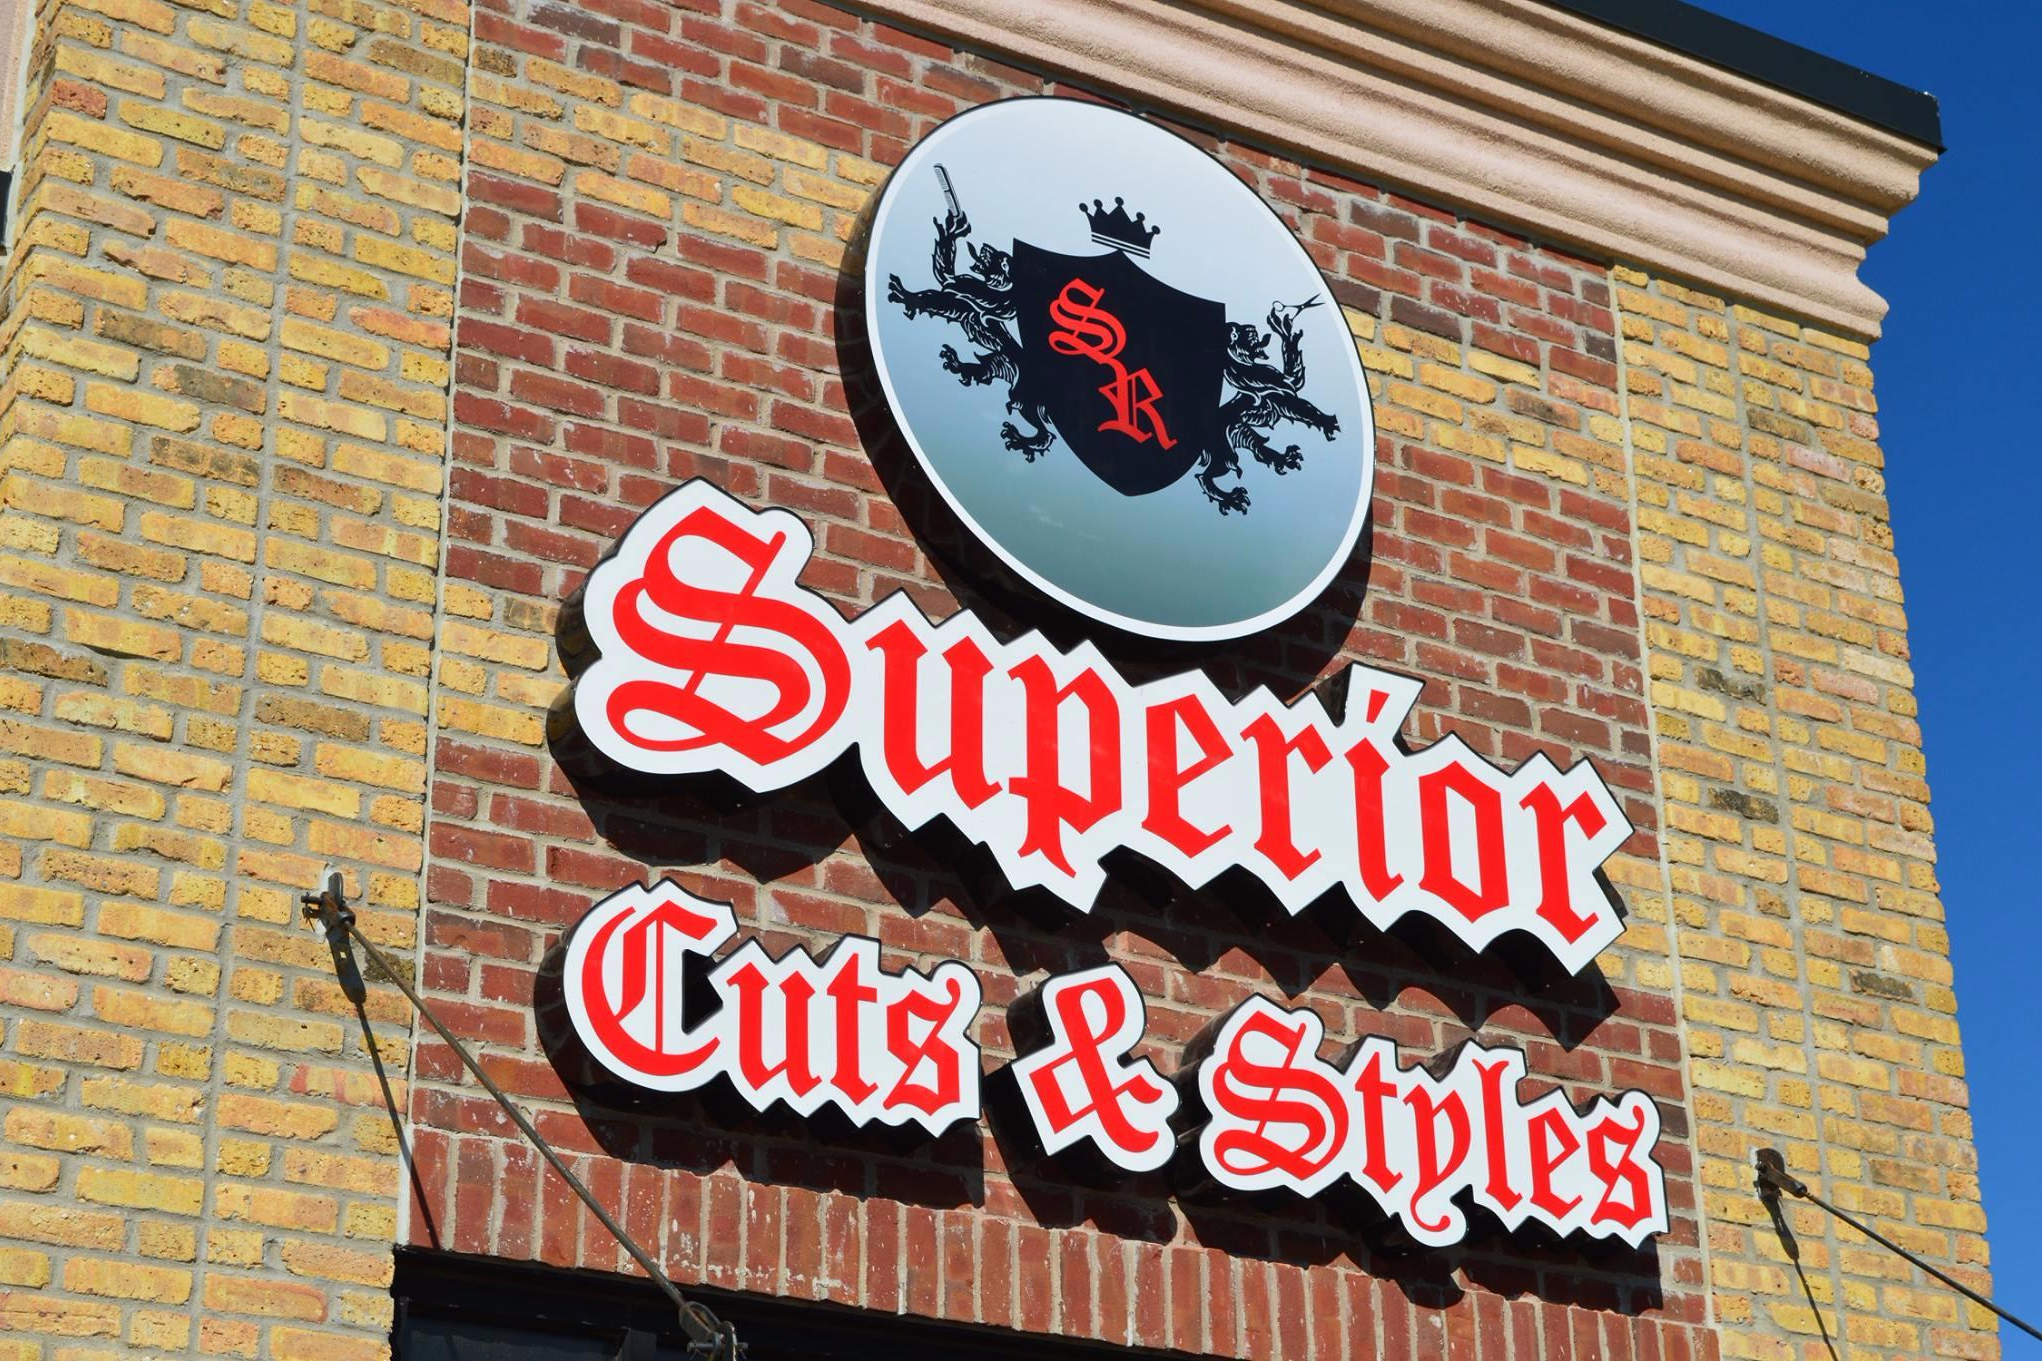 Superior Cuts And Styles In Killeen Tx Vagaro